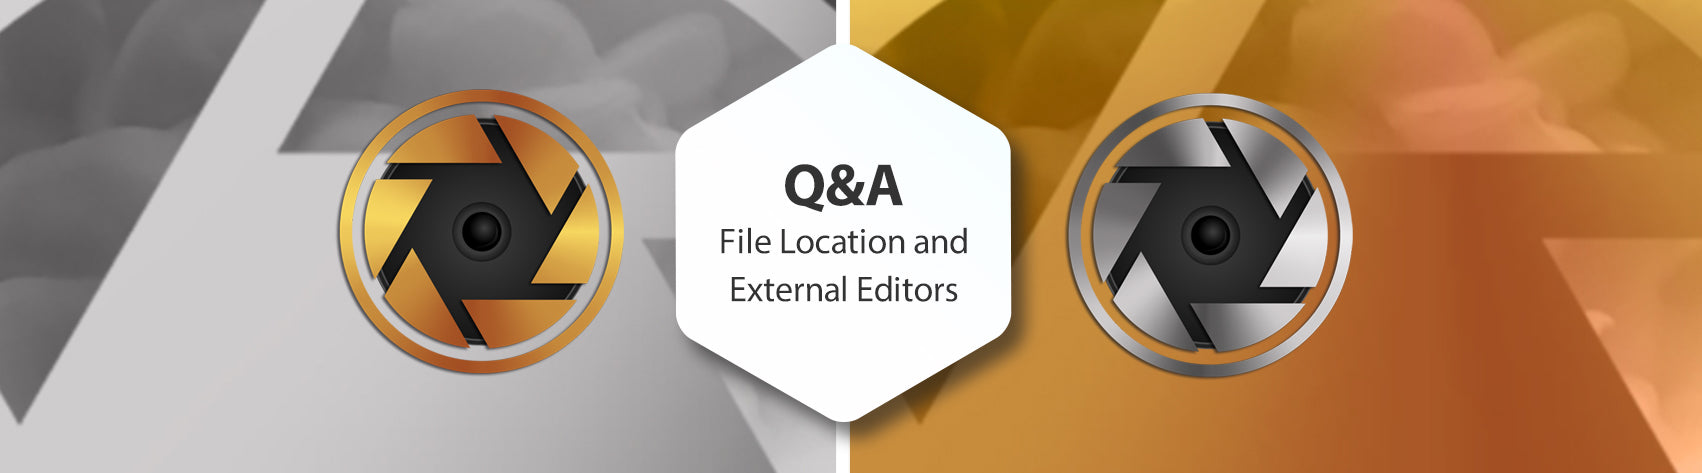 Q&A File Location and External Editors